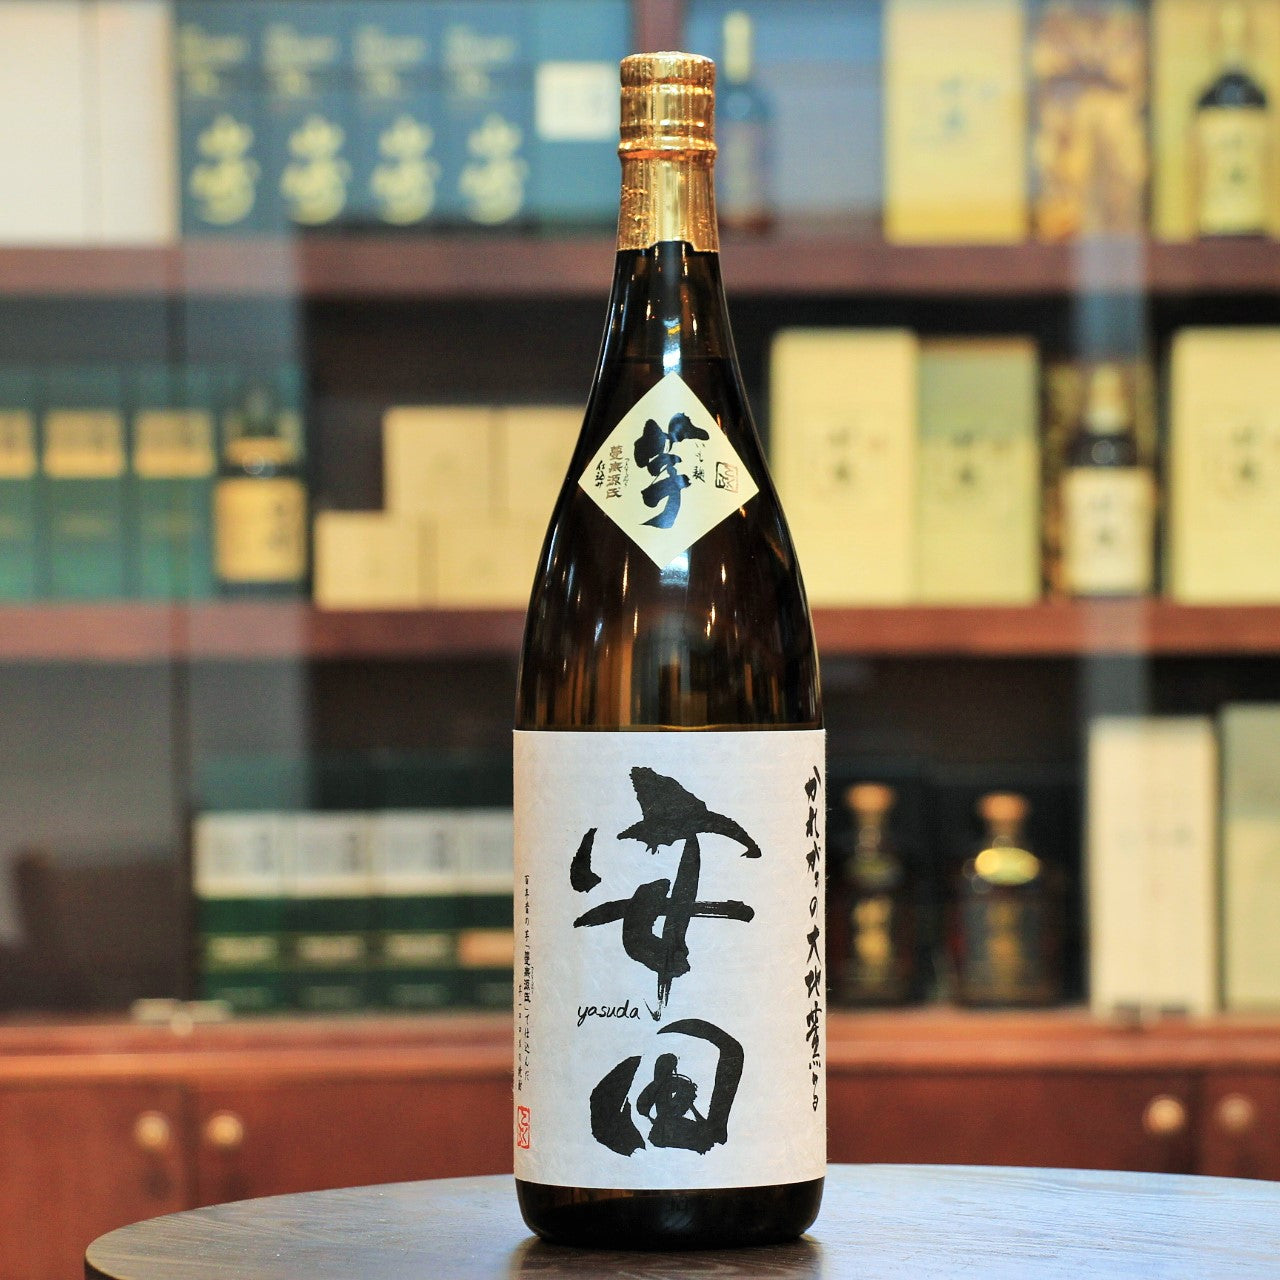 Yasuda 100% Imo Shochu (Sweet Potato), Japan, Rich aroma of fruits such as lychee, muscat and ripe mango. Mr. Atsushi Yasuda has been awarded  “Contemporary Master Craft” recently. He is the one who produces this 100% Imo (Sweet Potato) Shochu. Unlike the others, it does not have any rice malt. 